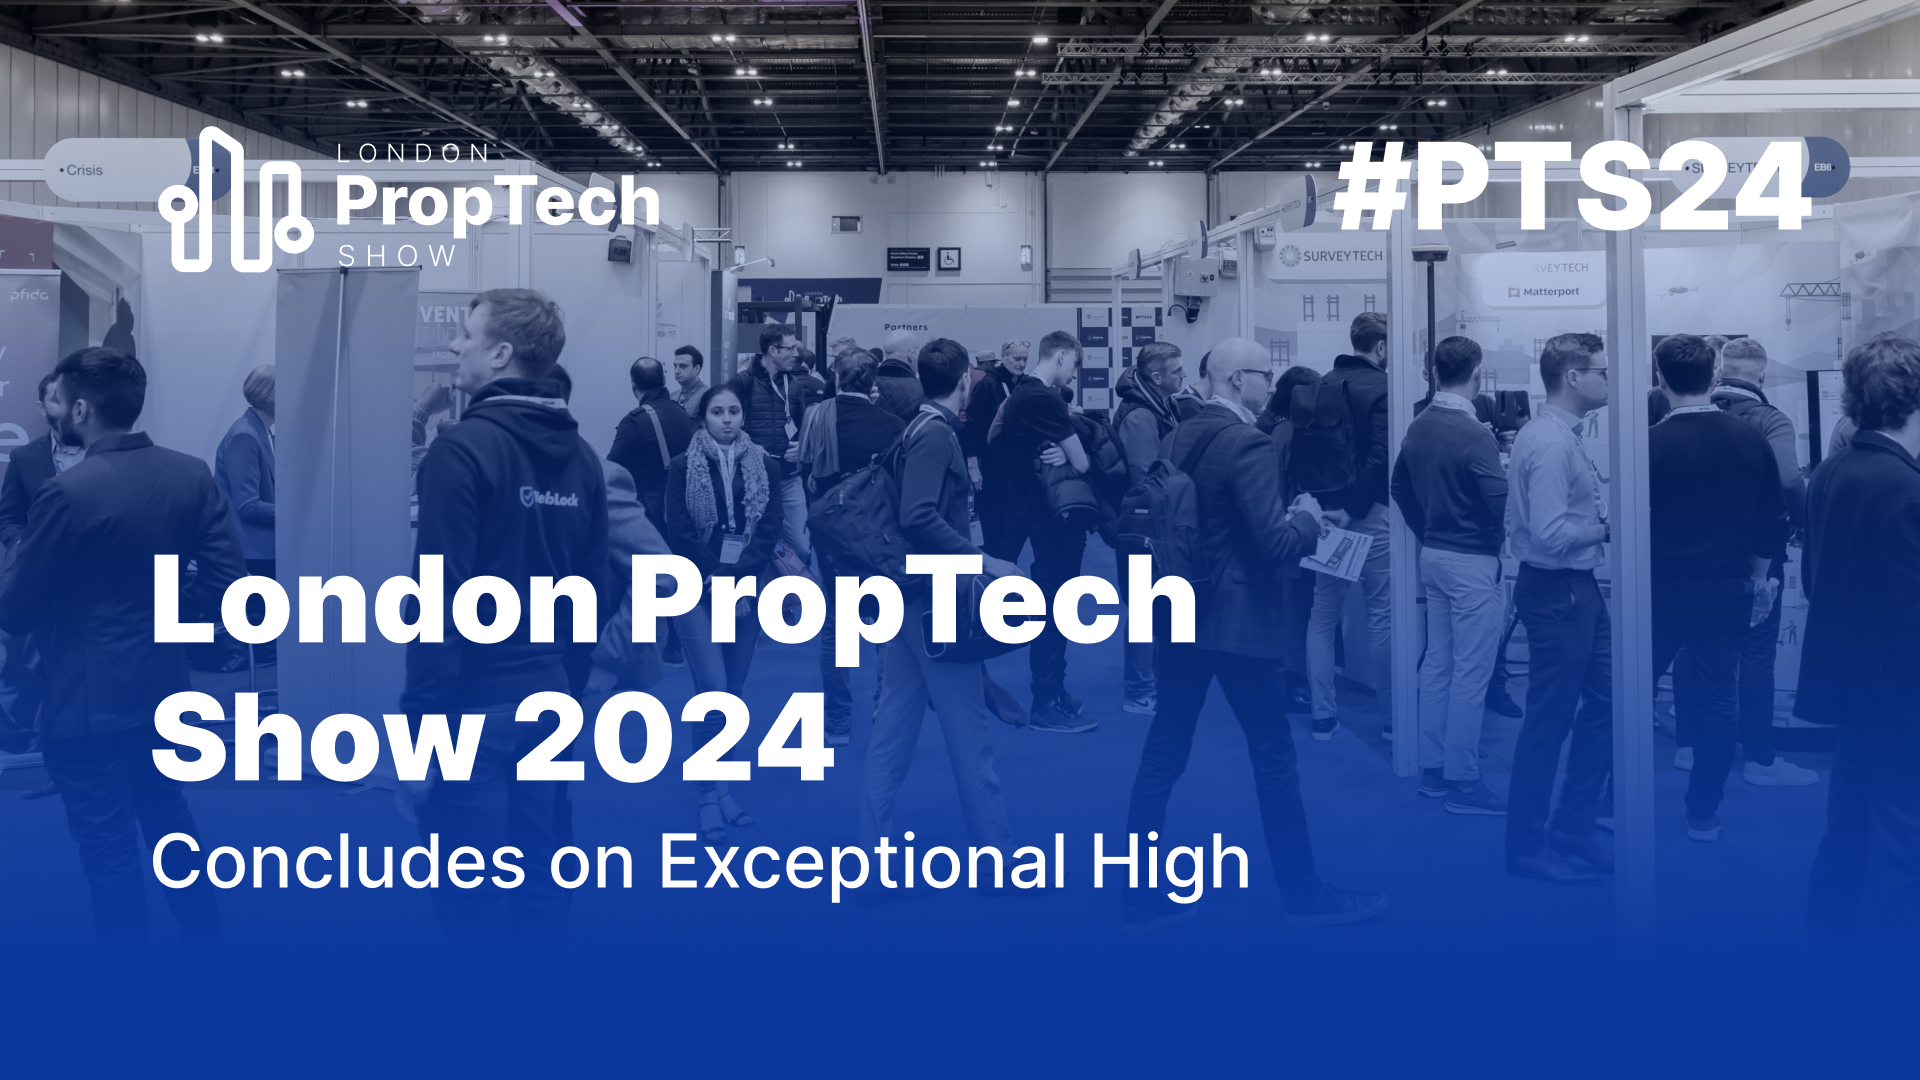 London PropTech Show 2024 Concludes on Exceptional High